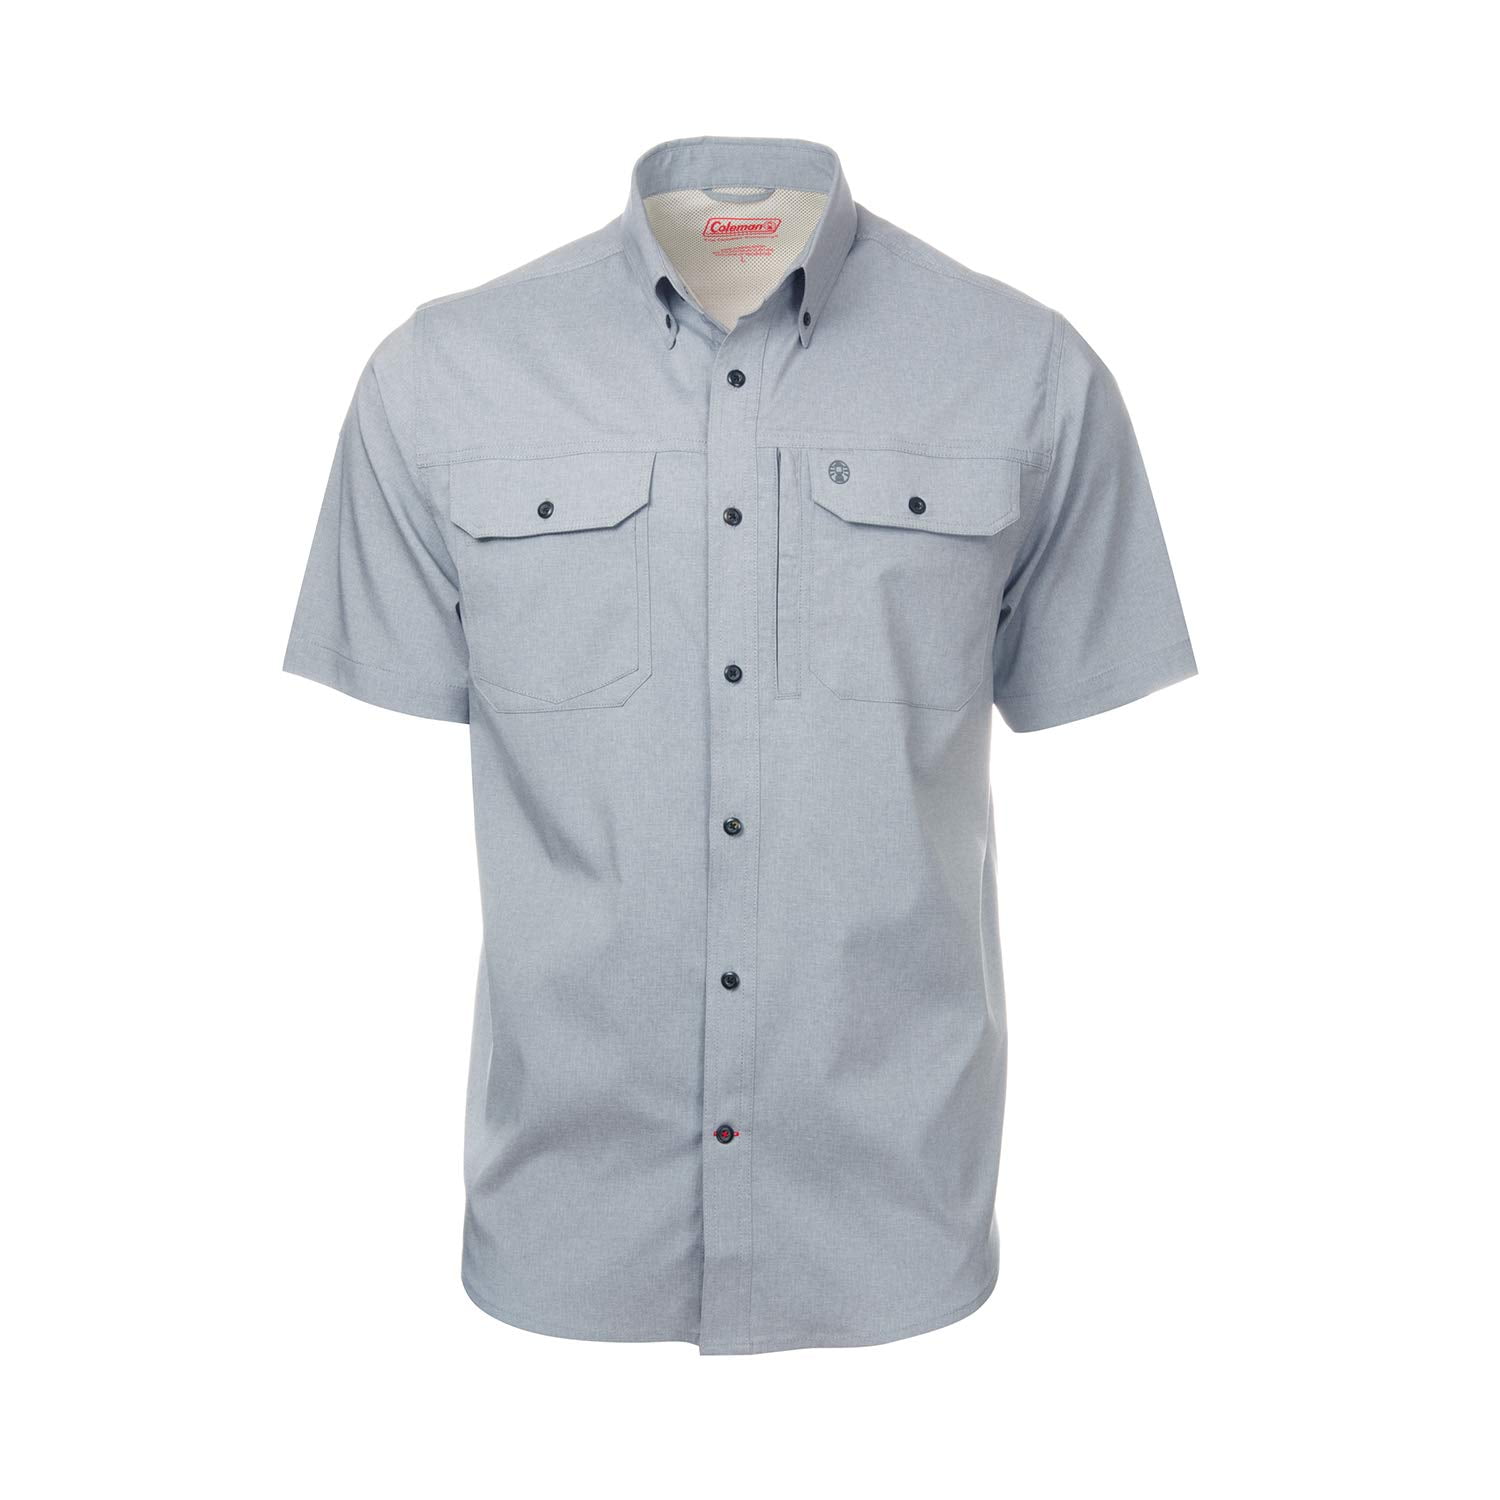 Coleman Fishing Shirts For Men with UPF Sun Proof and Moisture Wicking  Technology 